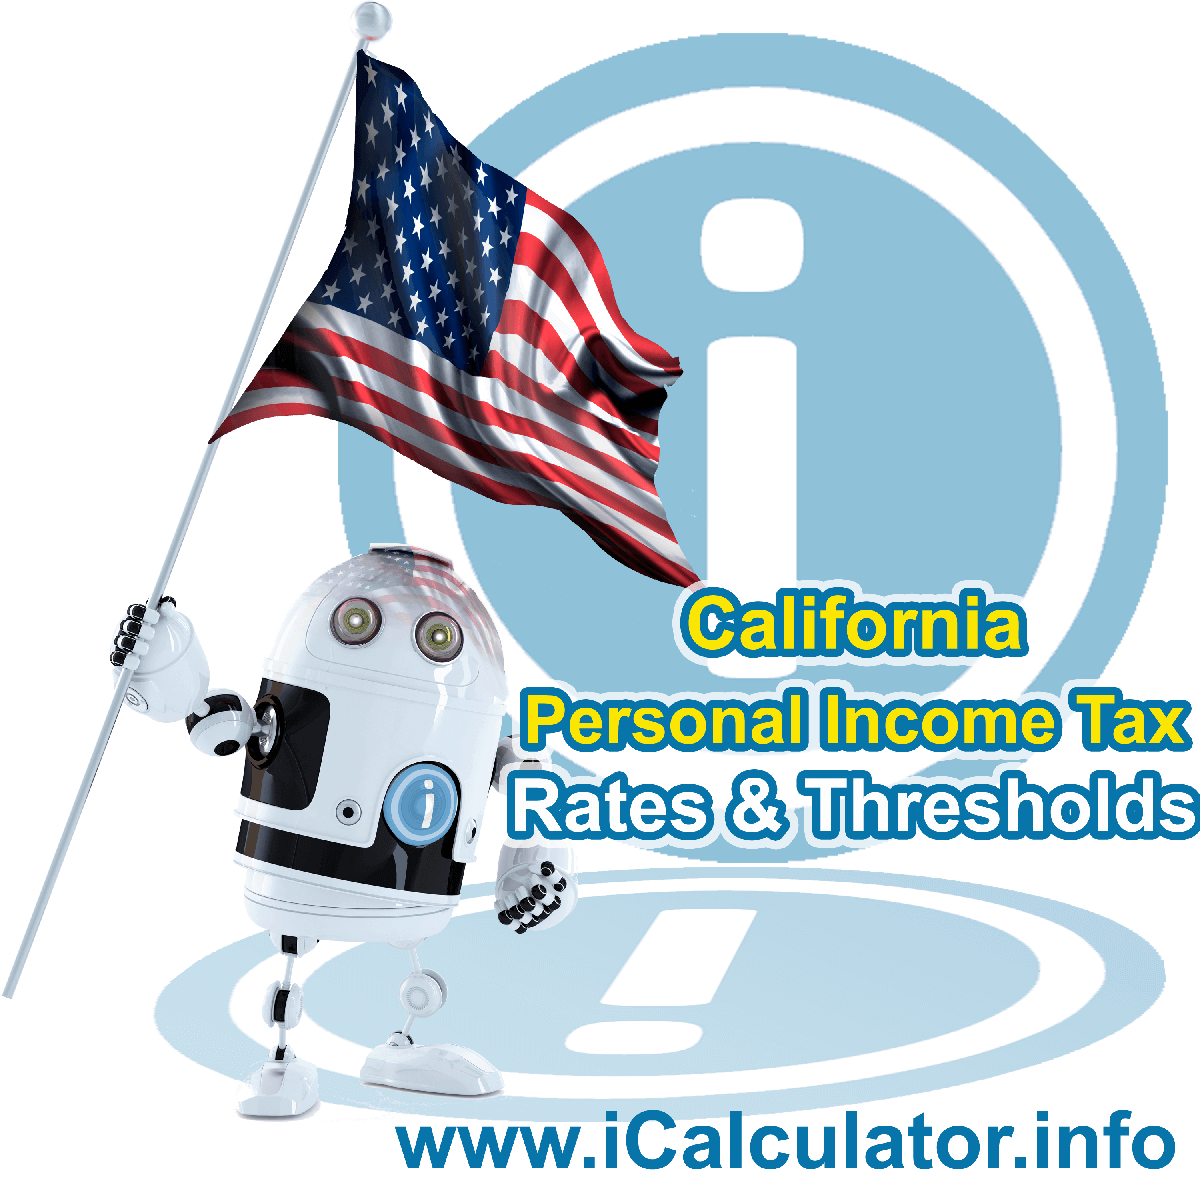 California State Tax Tables 2018. This image displays details of the California State Tax Tables for the 2018 tax return year which is provided in support of the 2018 US Tax Calculator